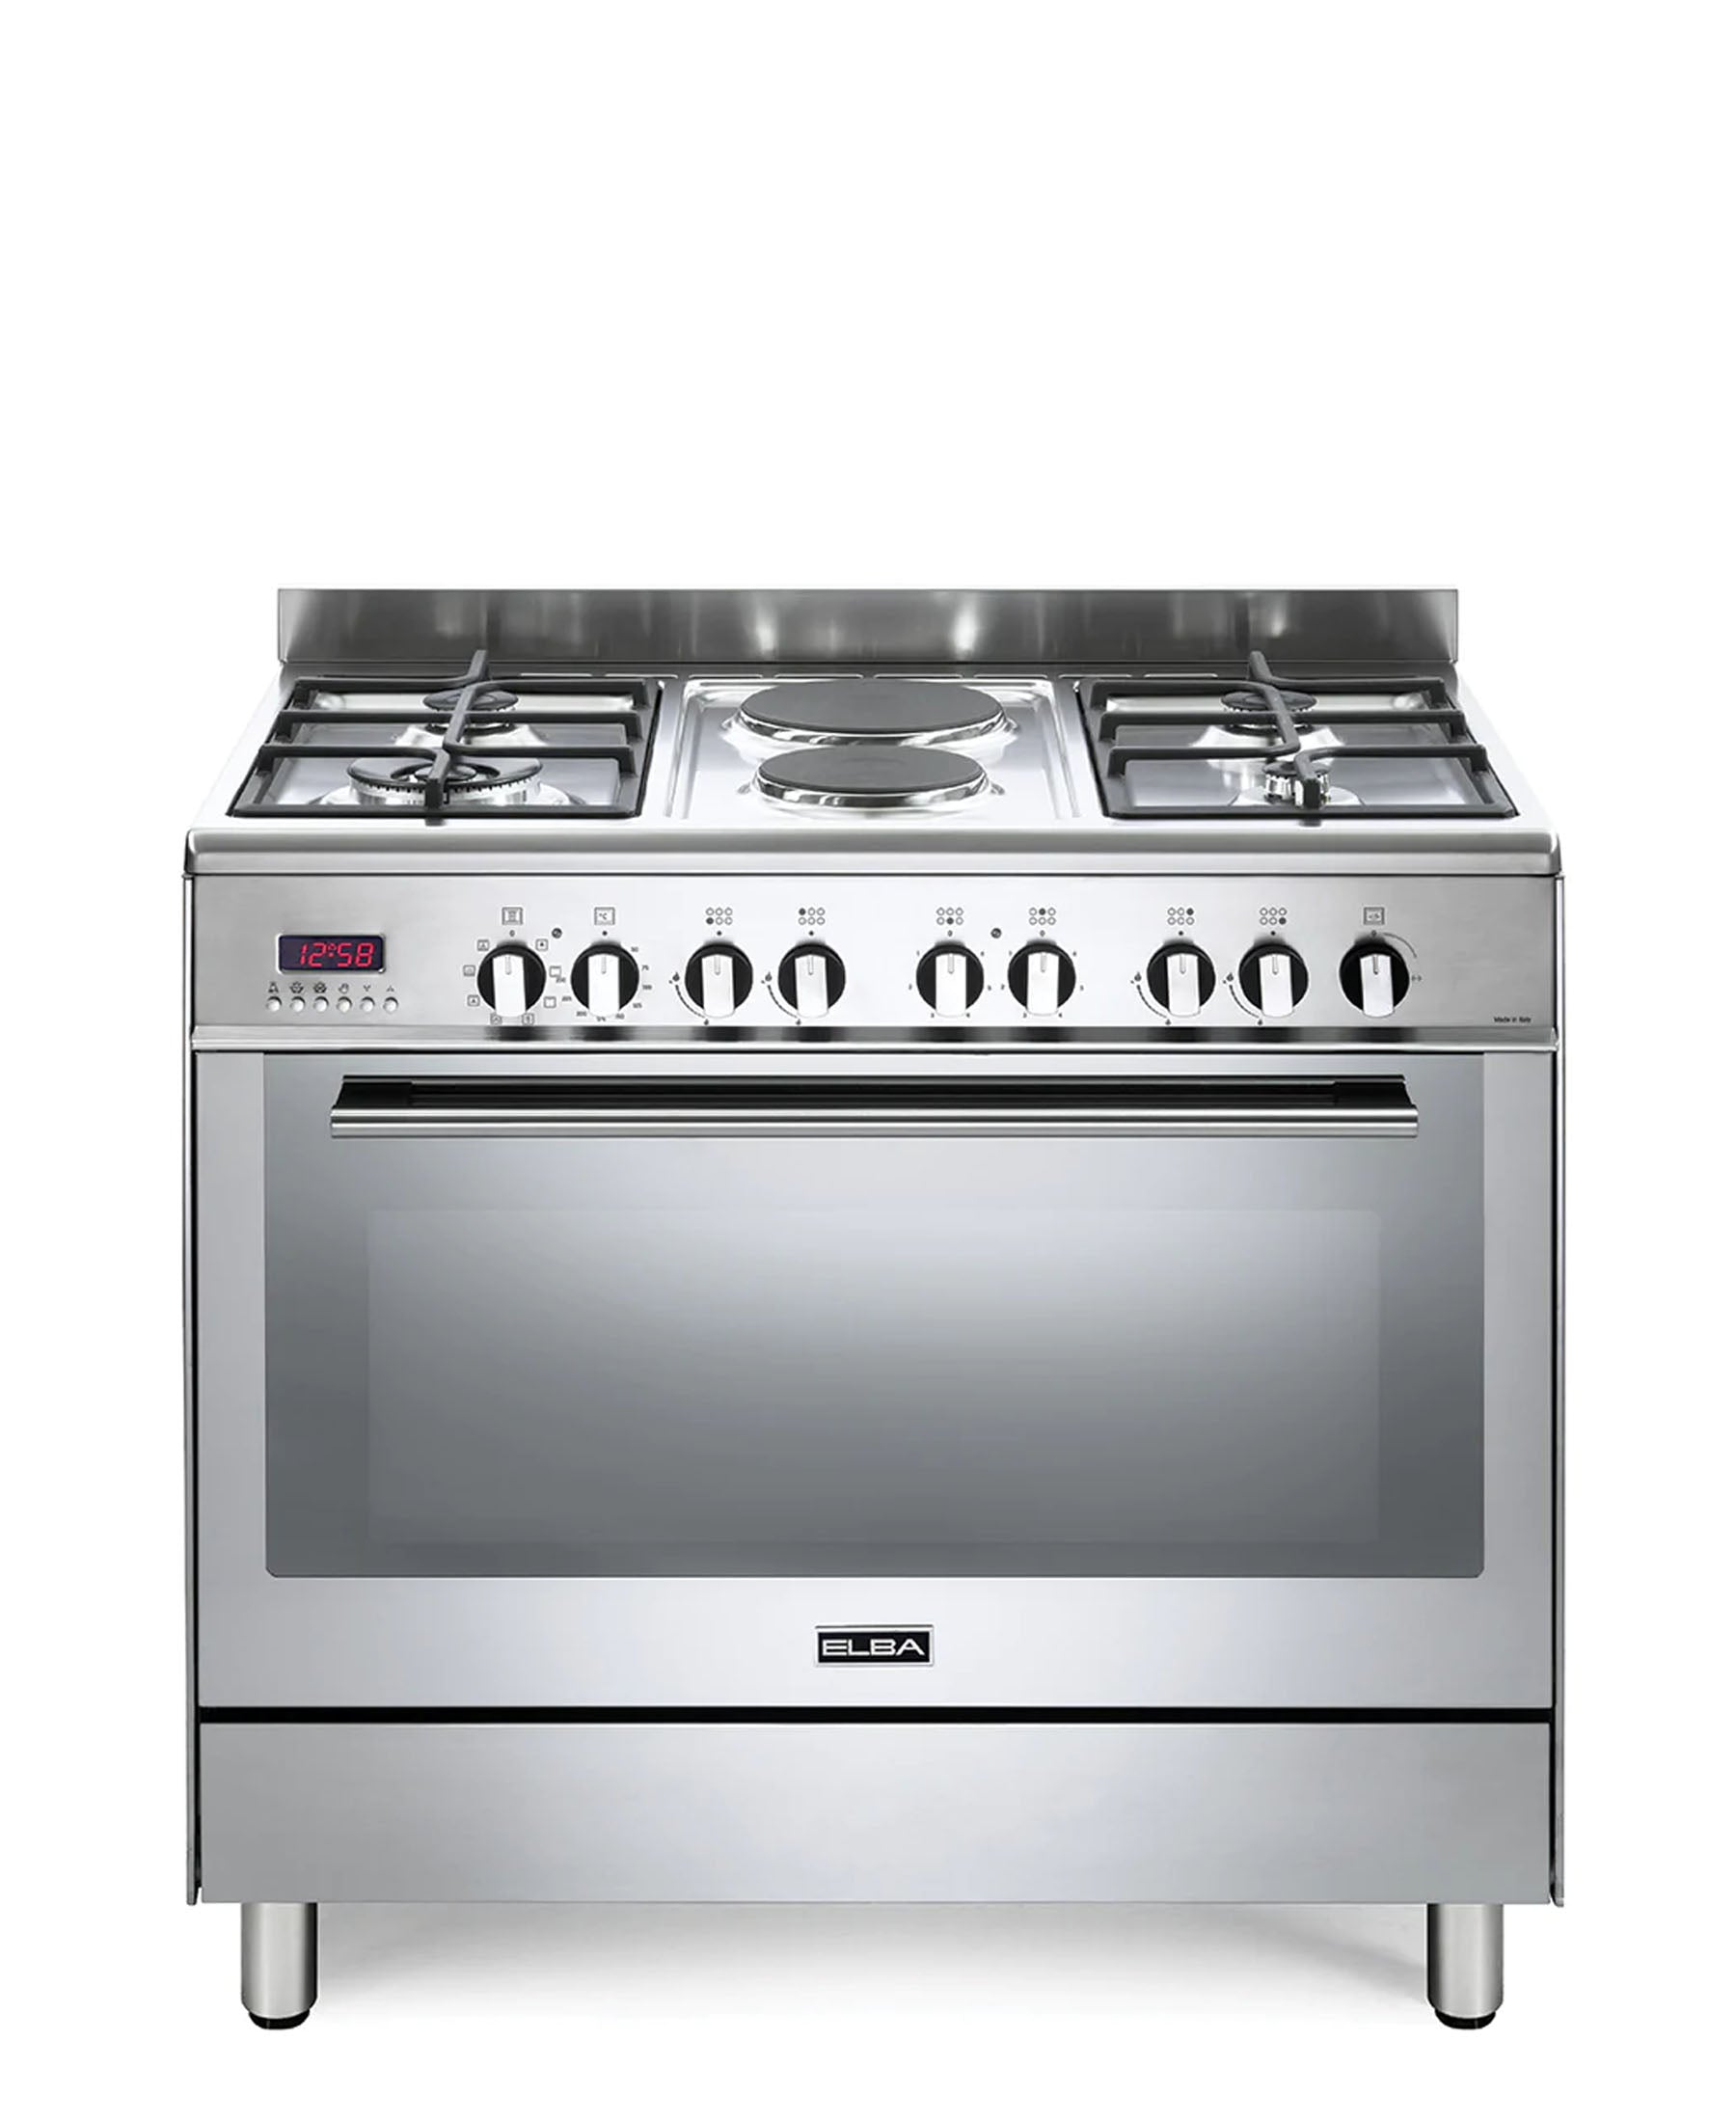 Elba Fusion 90cm 4 Burner Gas Cooker With 2 Electric Plates & Electric Oven - Silver